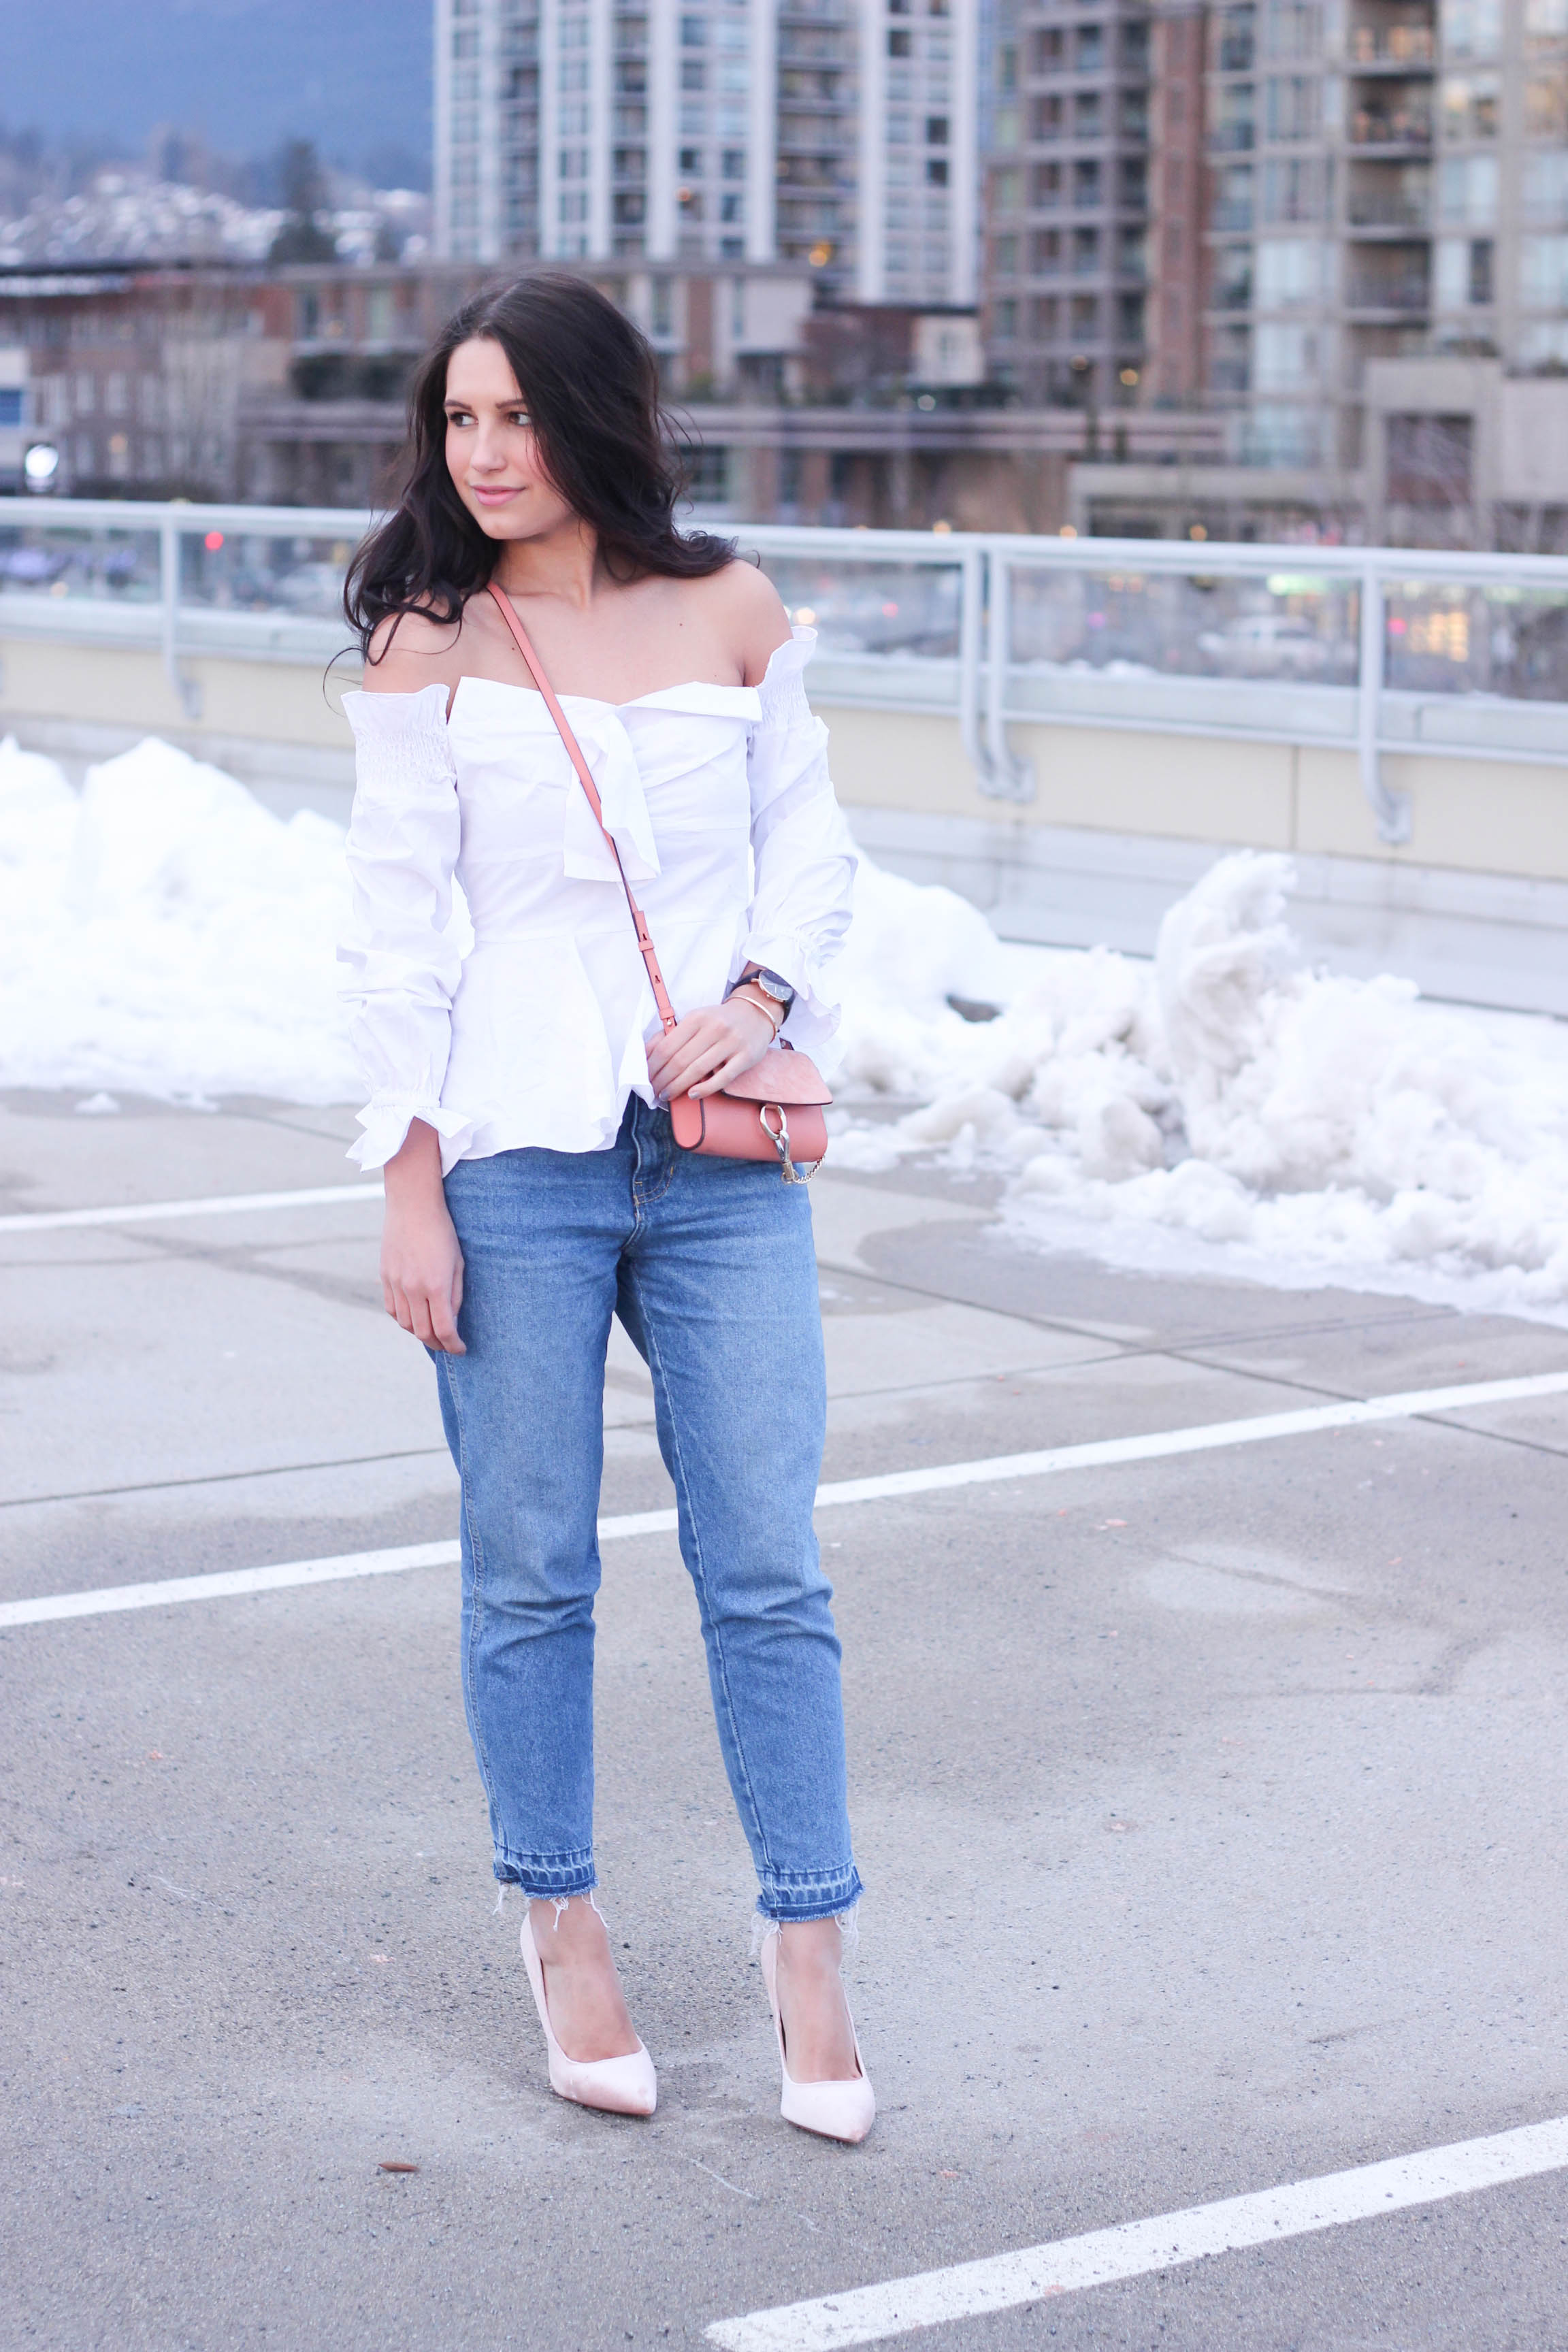 off-the-shoulder-tops-in-the-winter